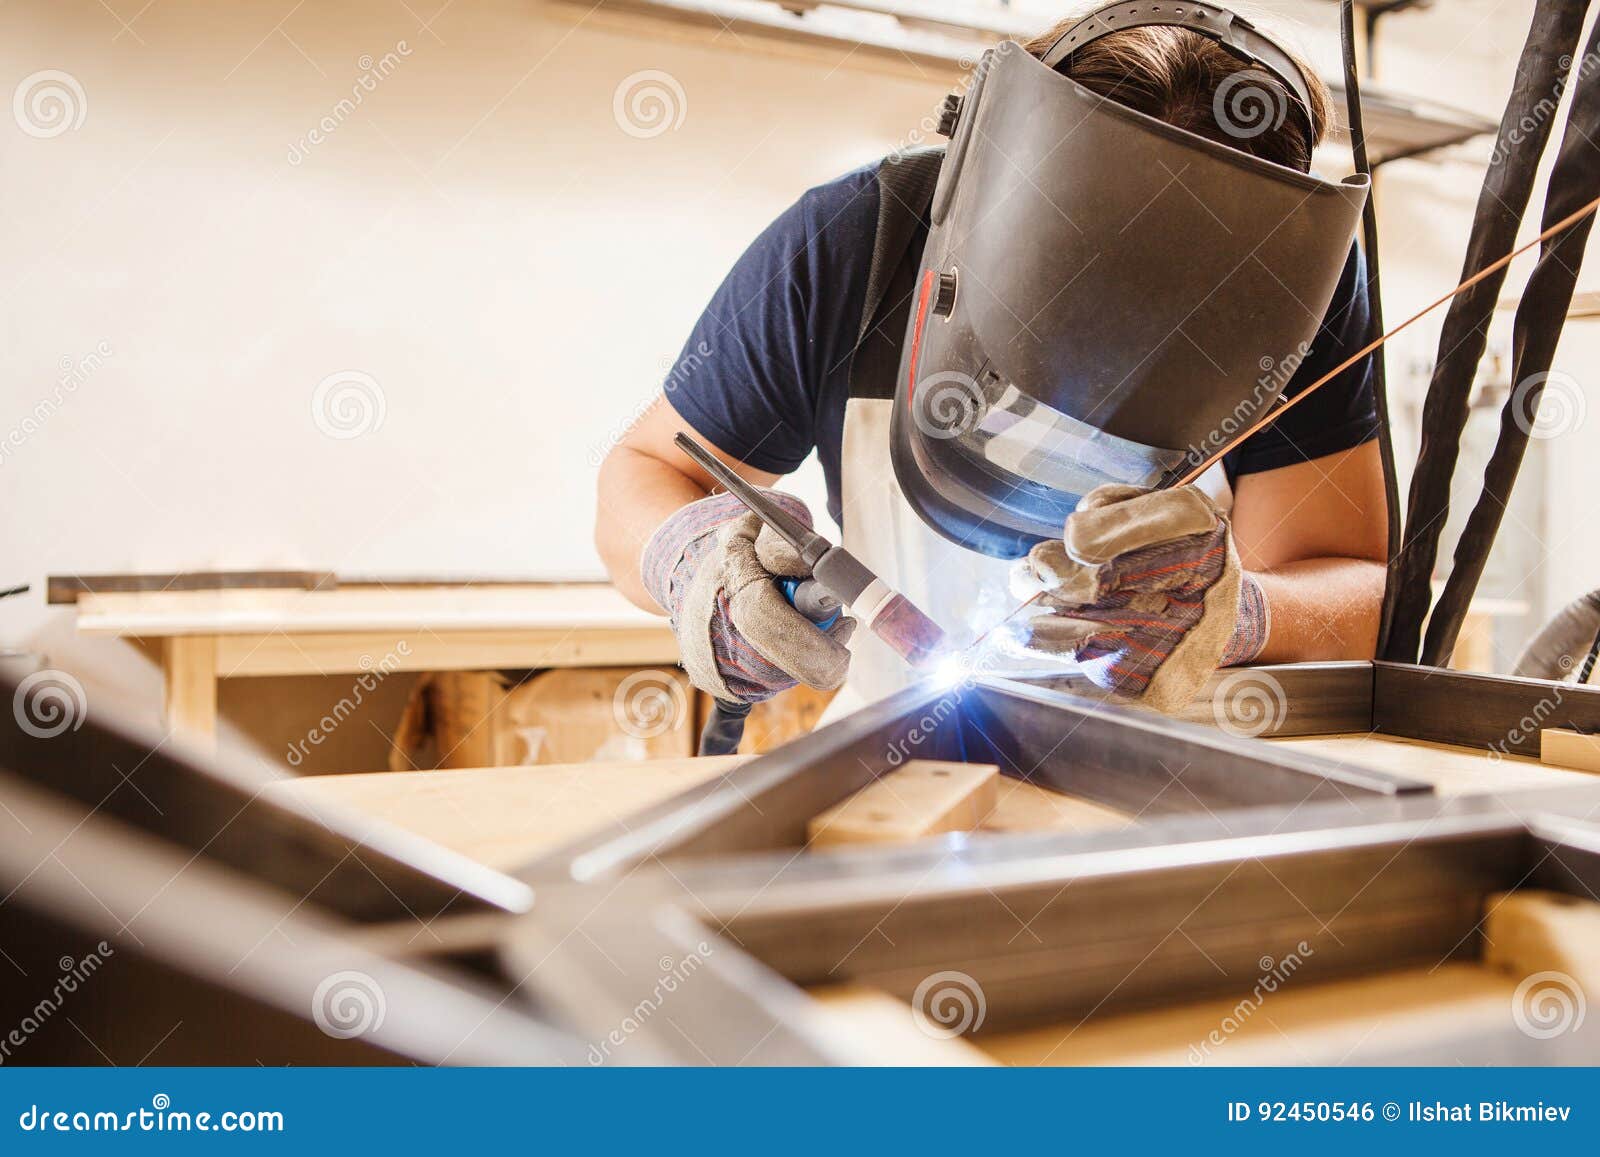 male in face mask welds with argon-arc welding